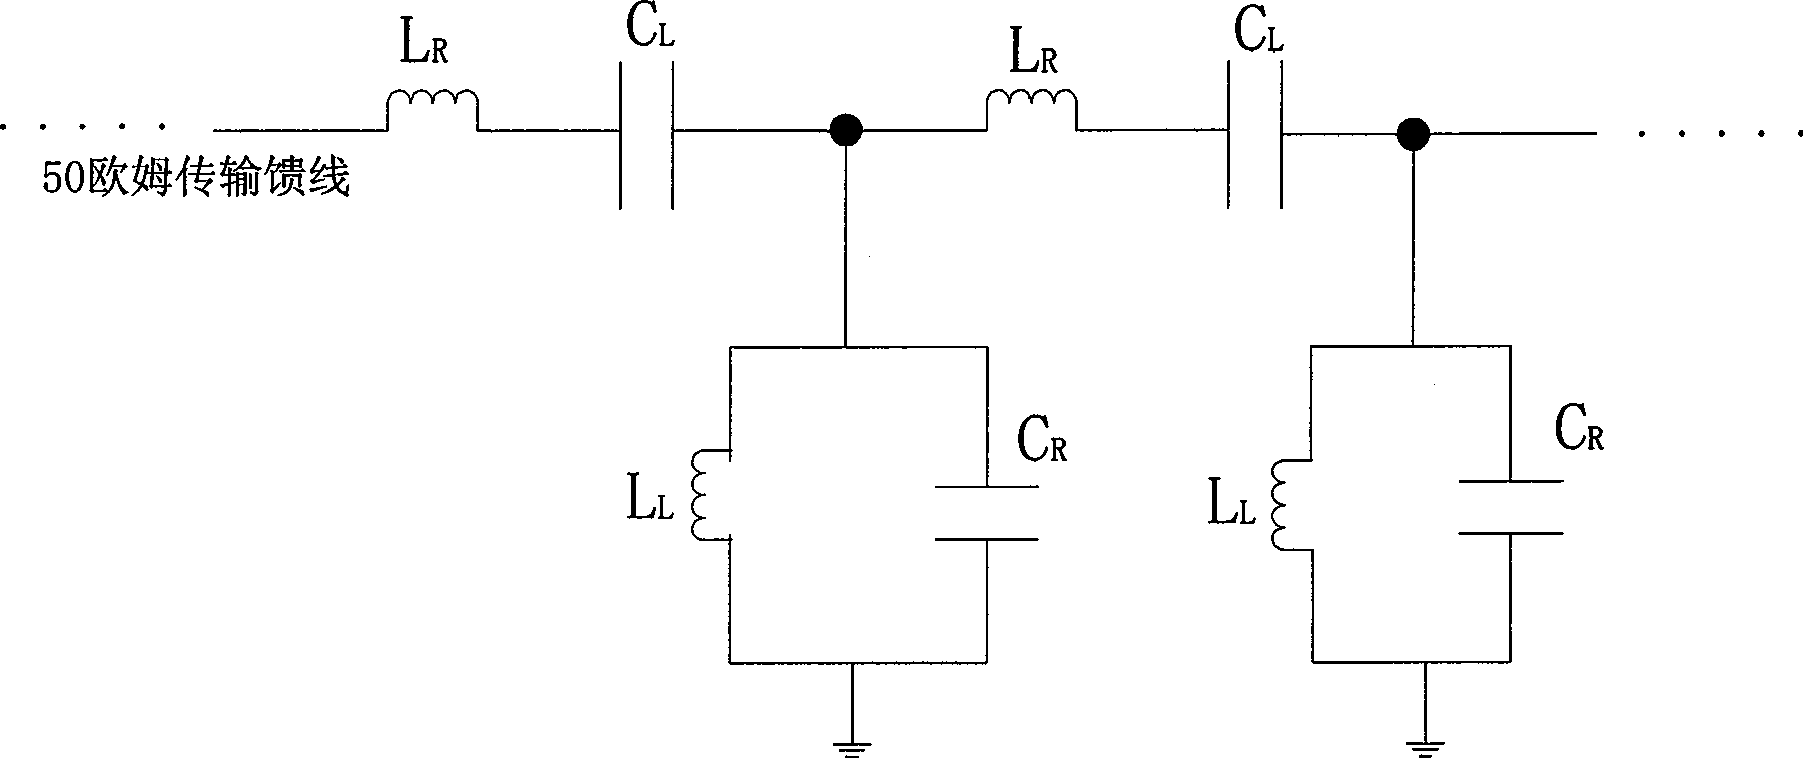 Zero-order resonant antenna of compound transmission line based on left and right hands